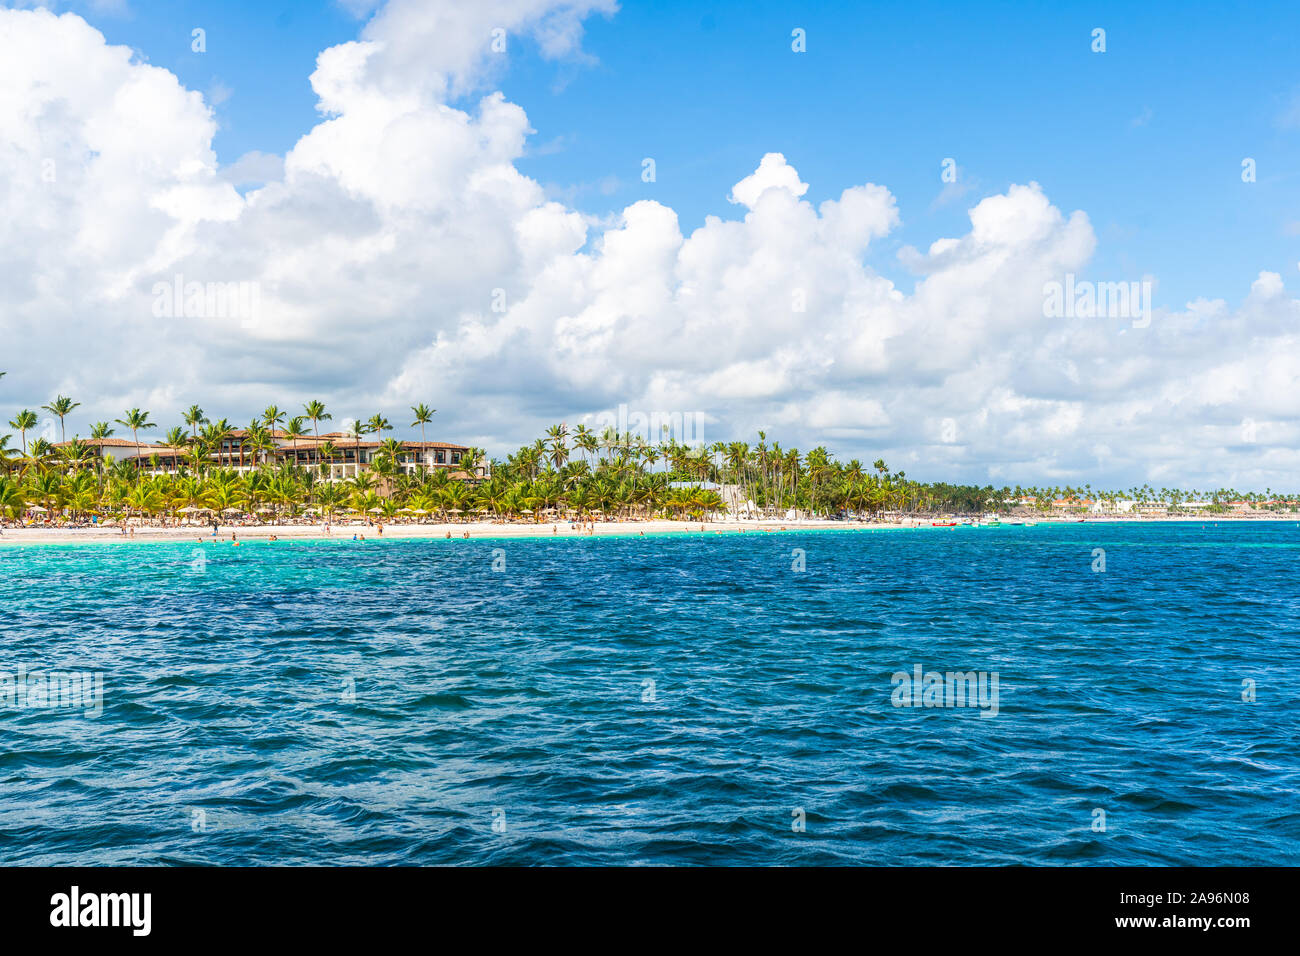 Relaxing Waters of Dominican Republic with a Beautiful Beach. Stock Photo